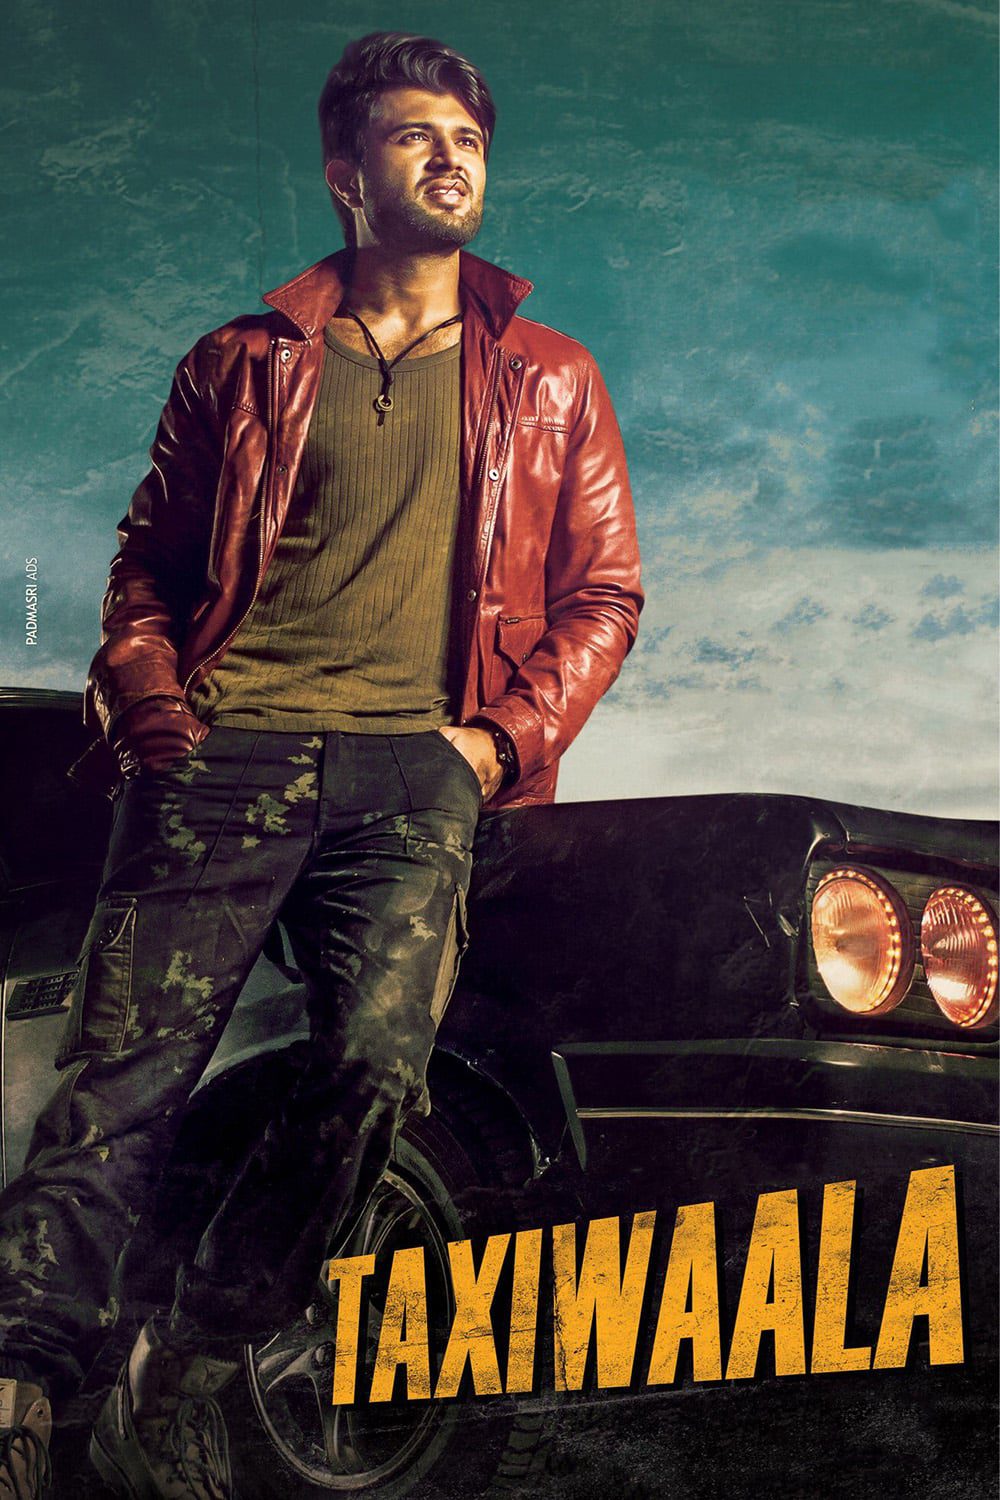 Poster for the movie "Taxiwala"